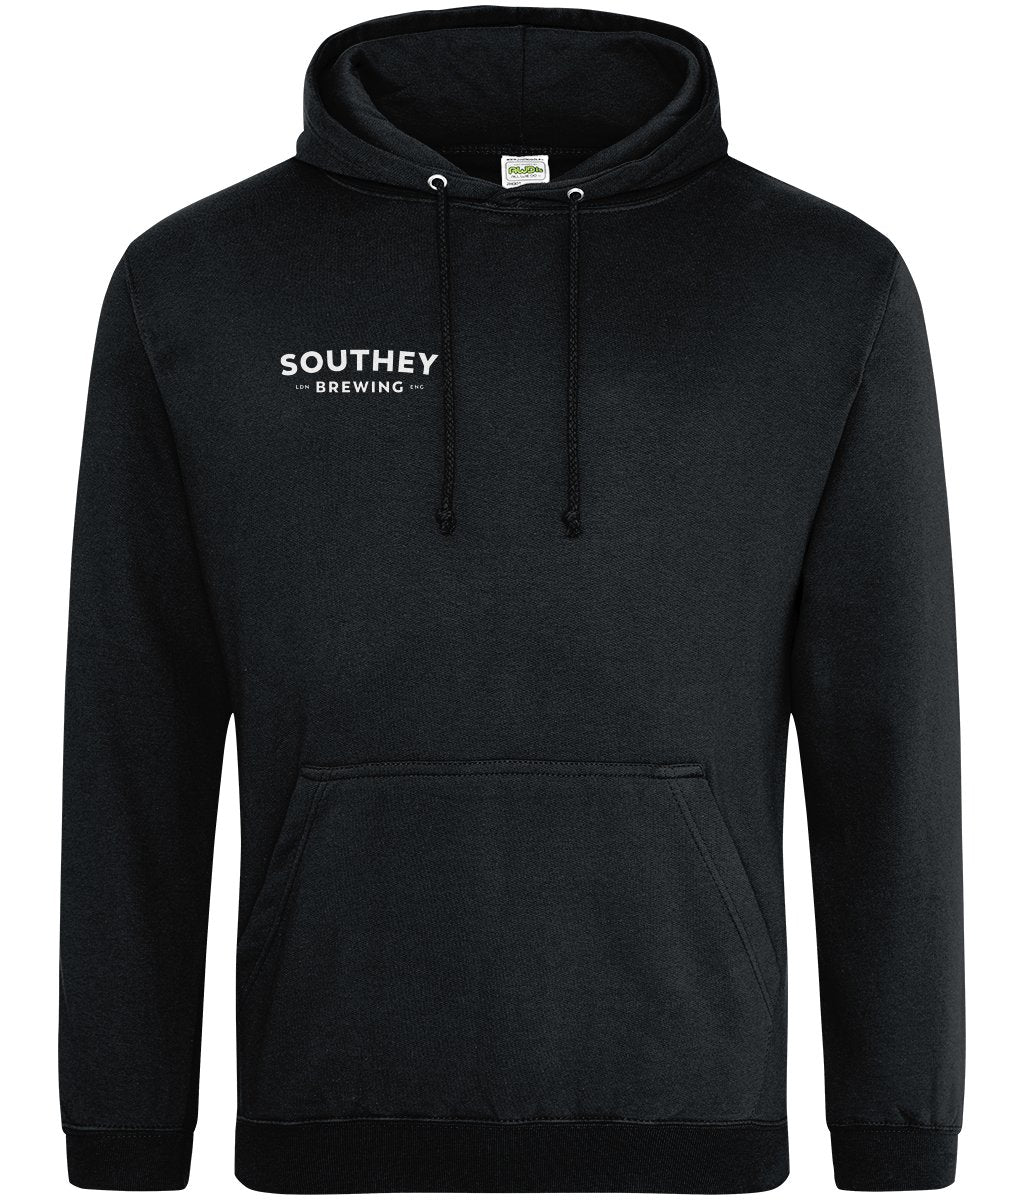 Original Southey Hoodie (White Logo) - Southey Brewery Co.